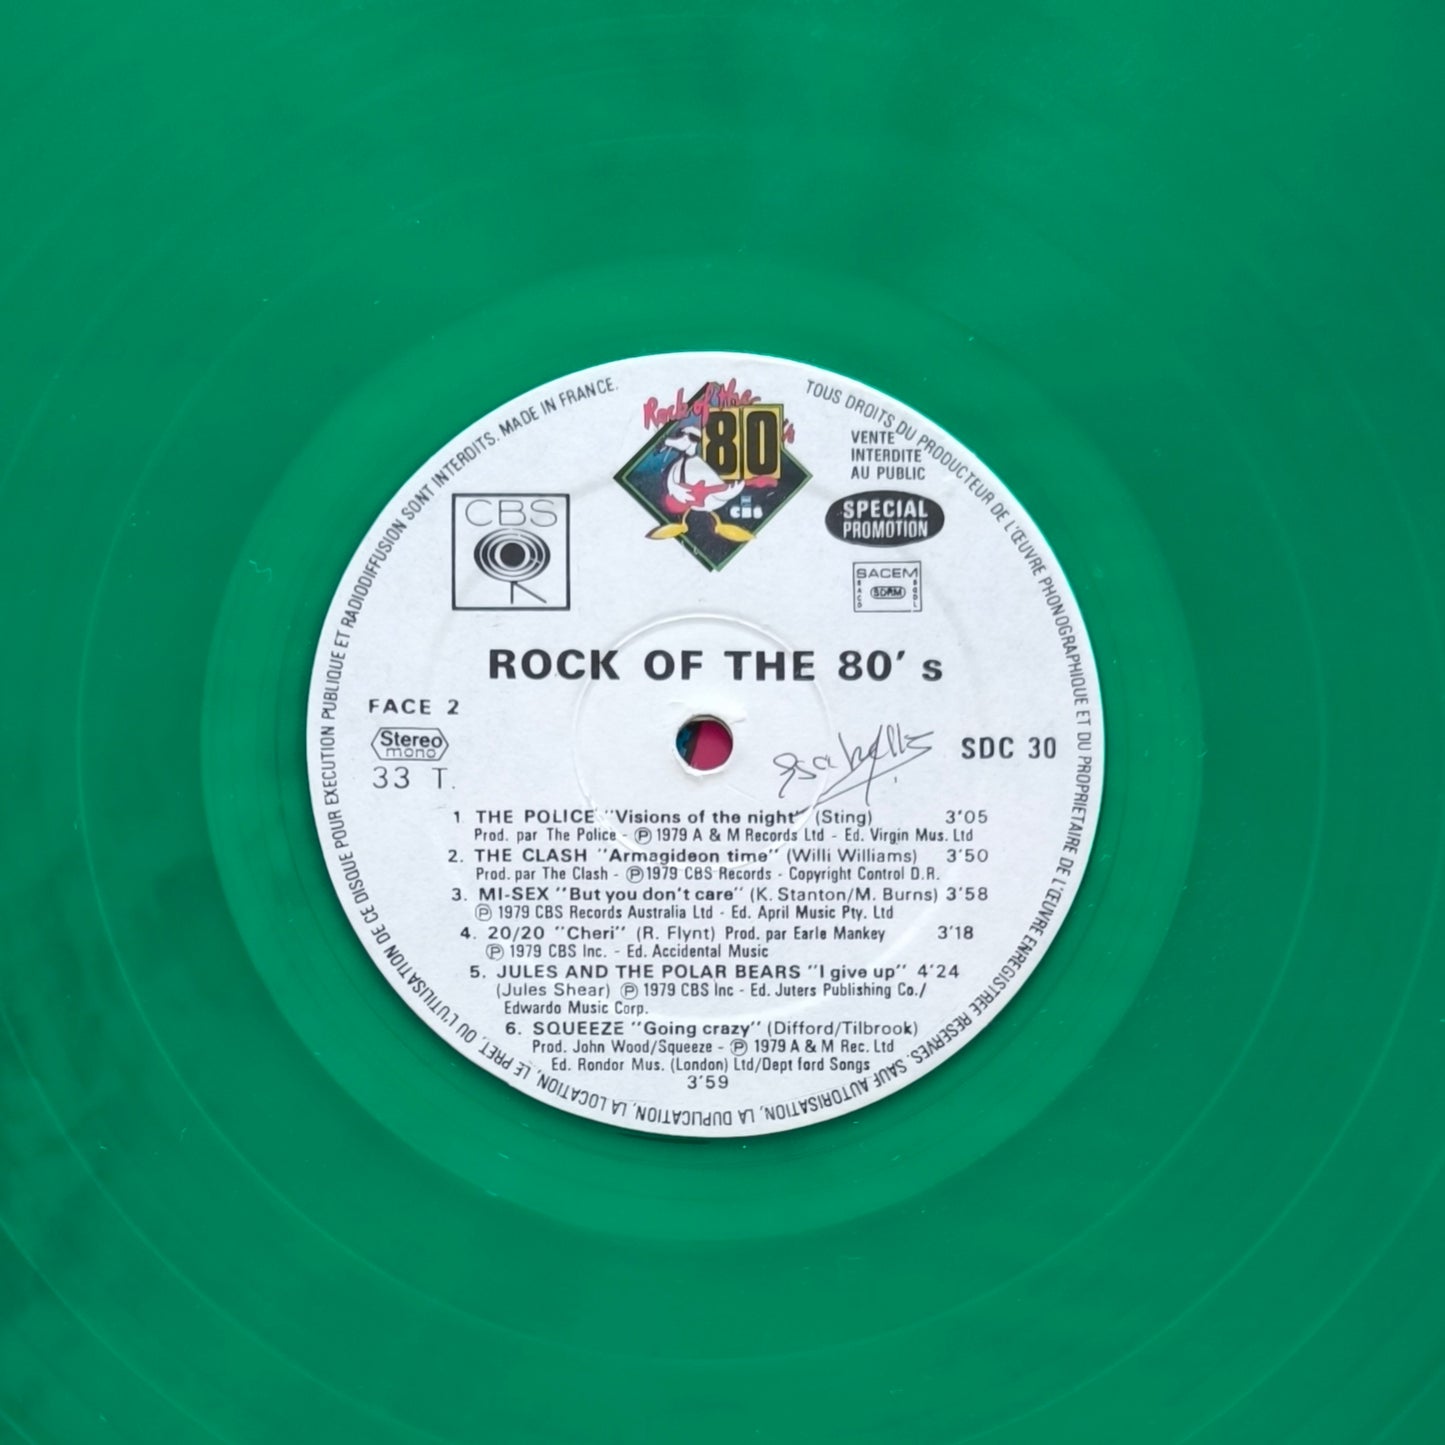 ROCK OF THE 80'S